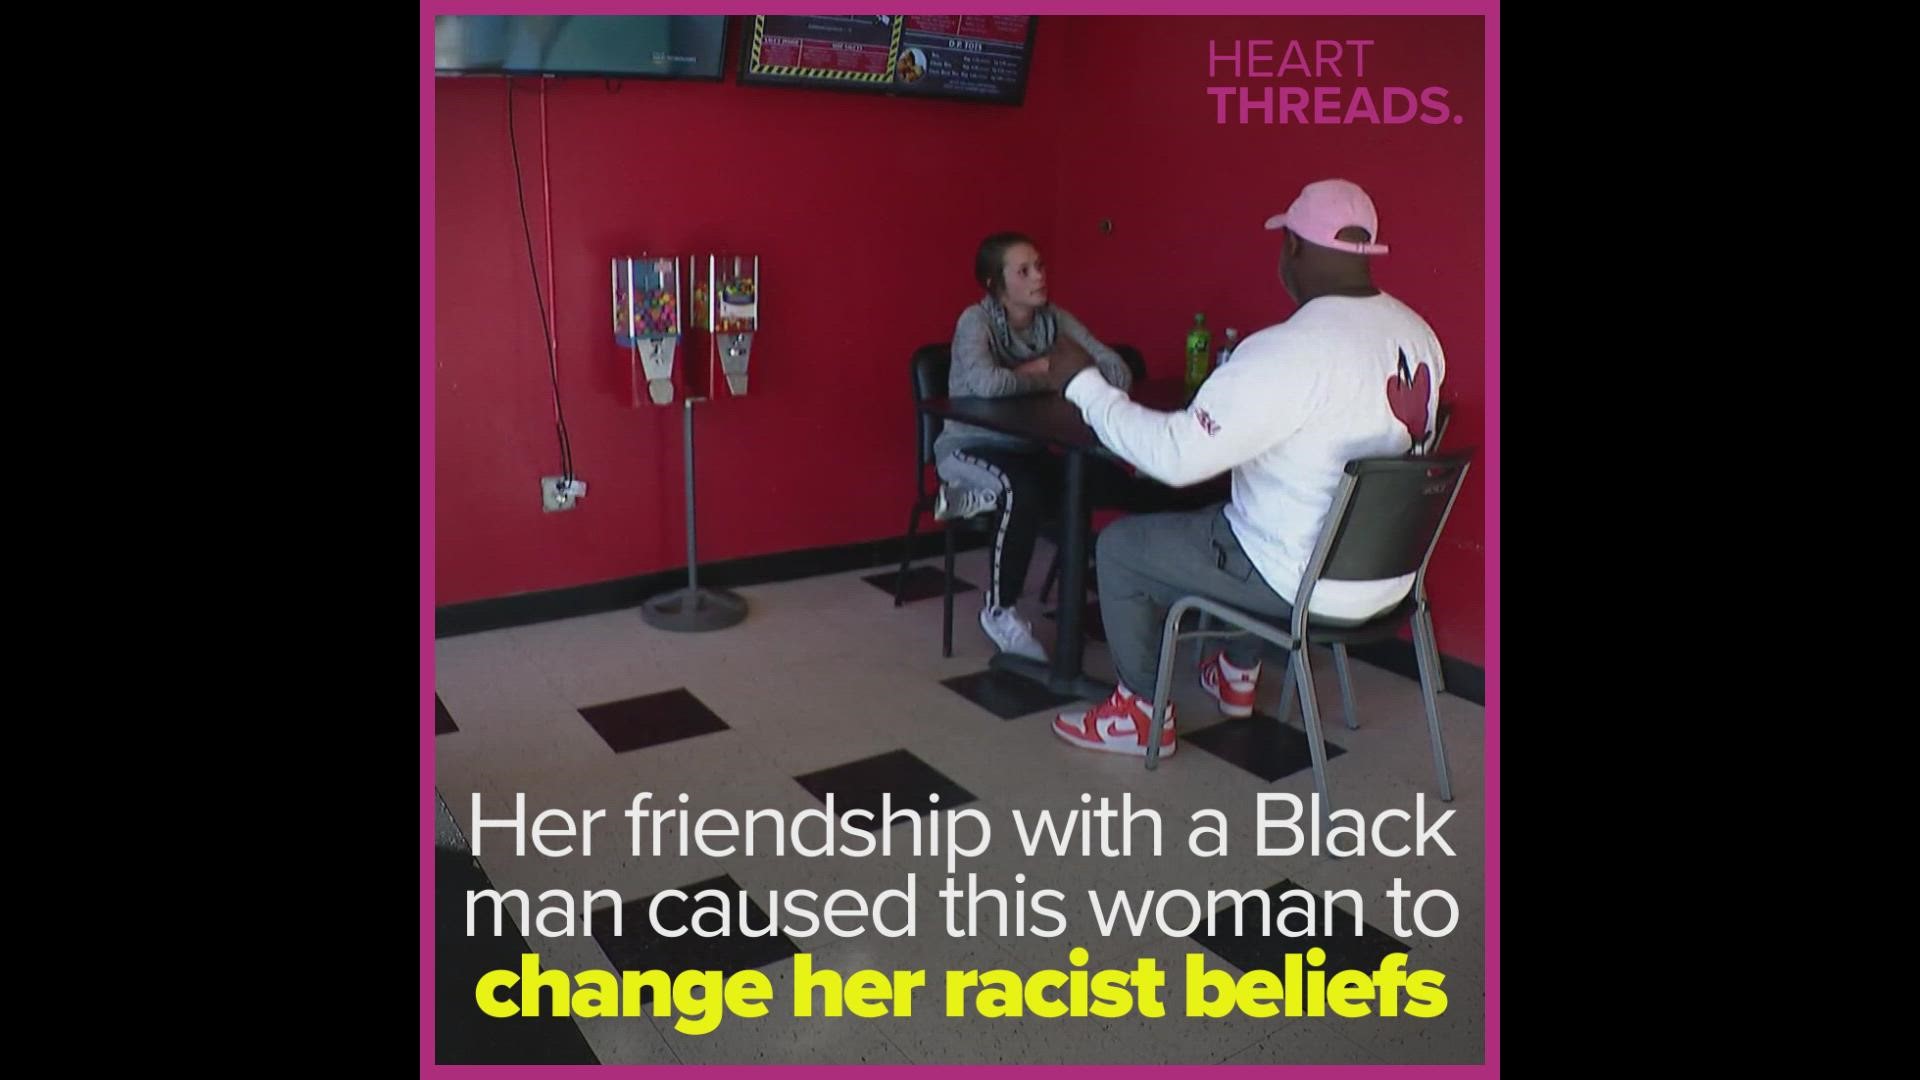 Bethany, a white woman, was raised to believe that races shouldn't mix. Then she became friends with a Black man, Joe, who challenged her worldview.